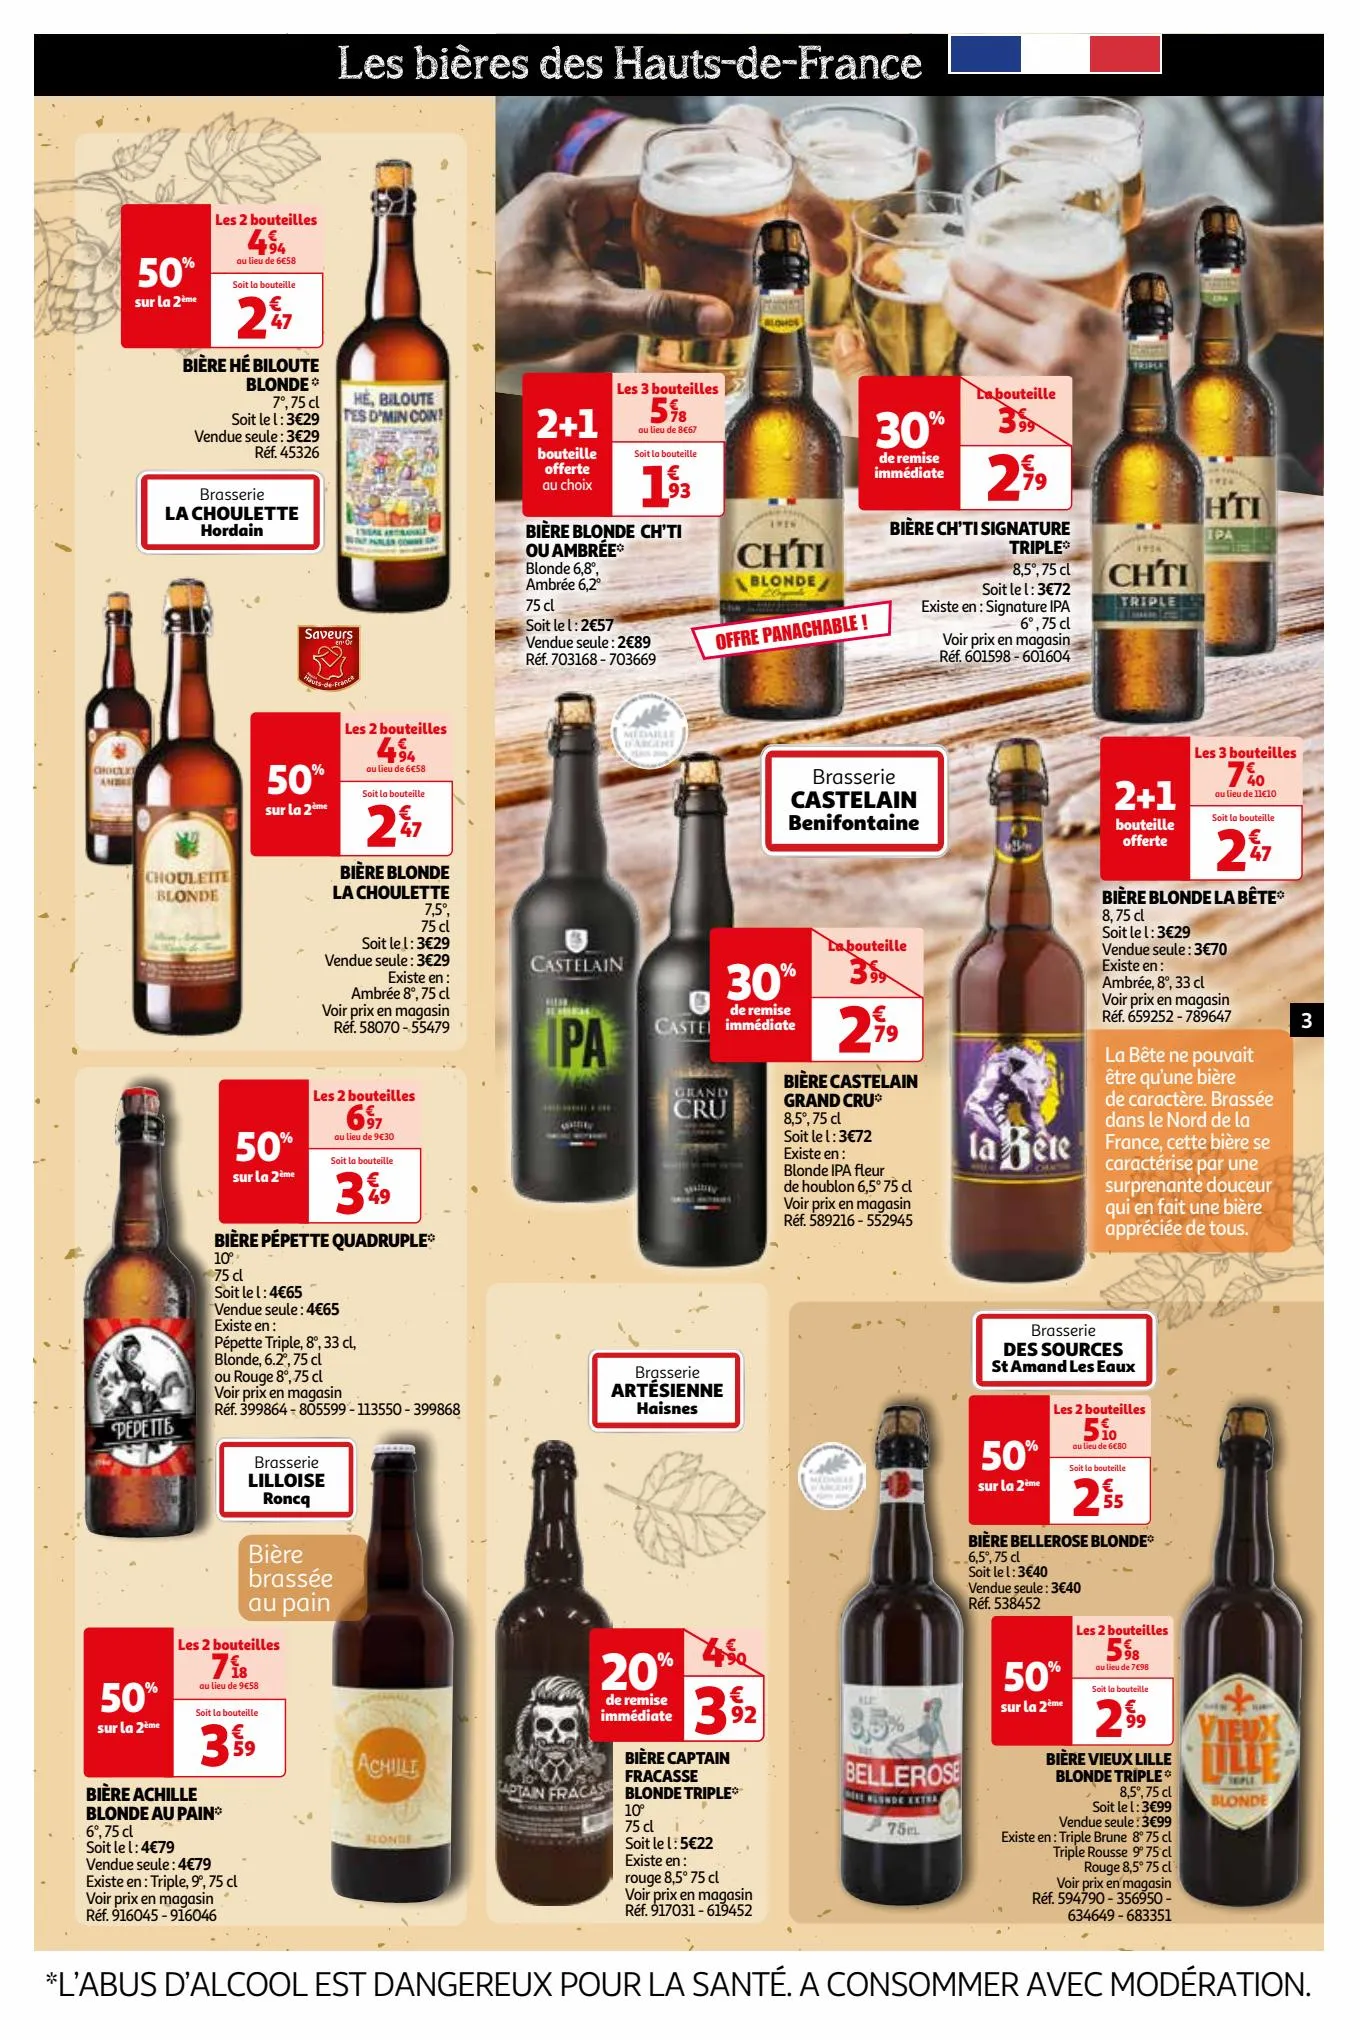 Catalogue Tract Bière, page 00003